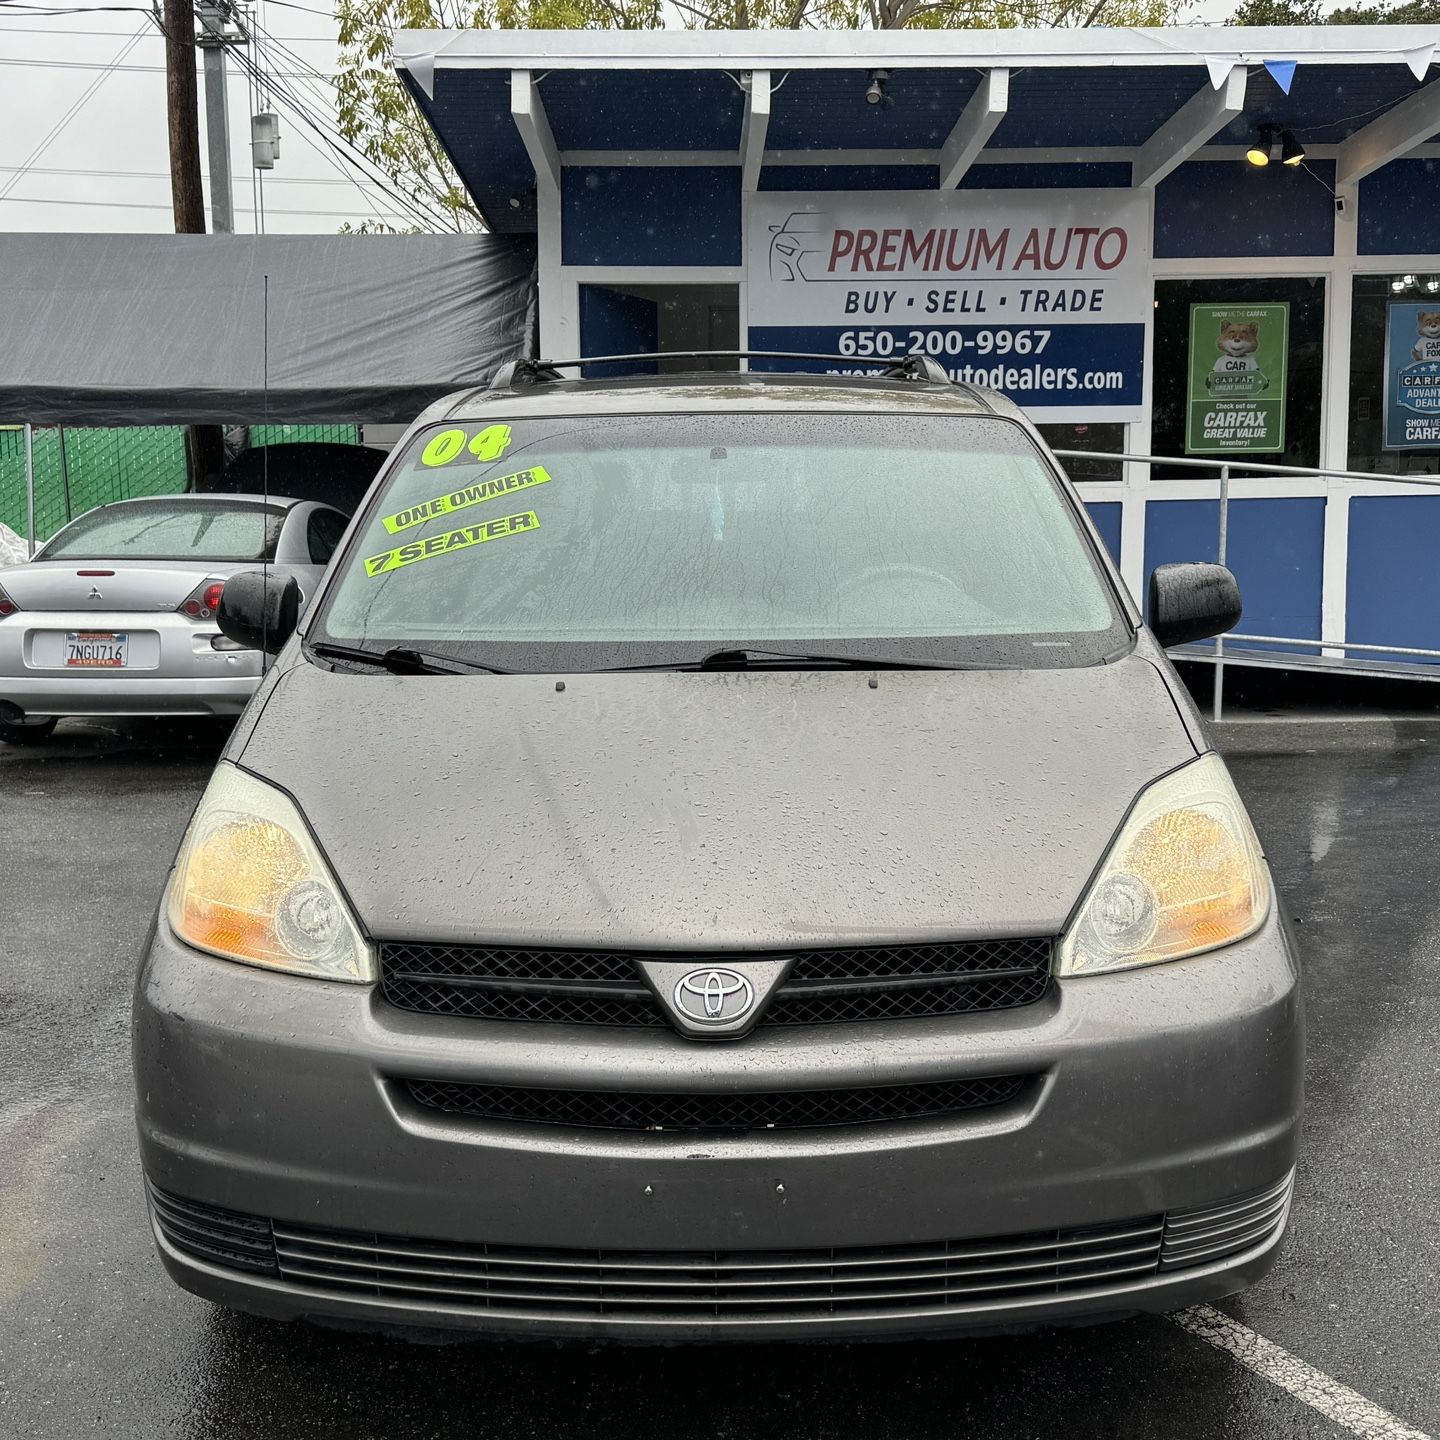 2004 Toyota Sienna CE. Clean Title, Pass Smog, 7 Seater! Runs Great!